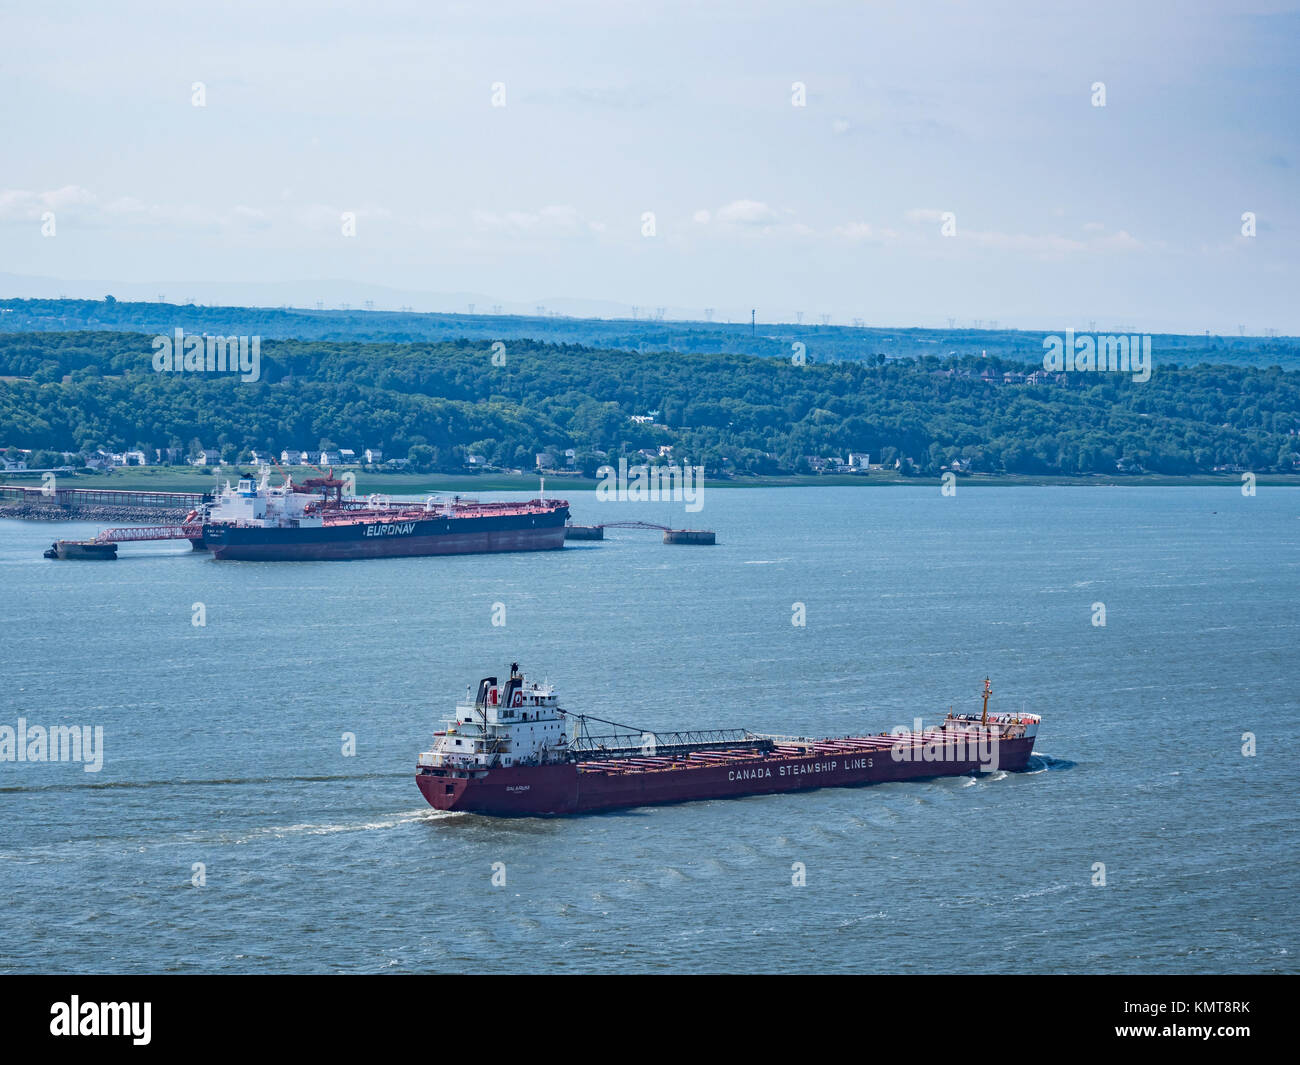 Cargo ship on the Saint Lawrence River, Quebec City, Canada. Stock Photo